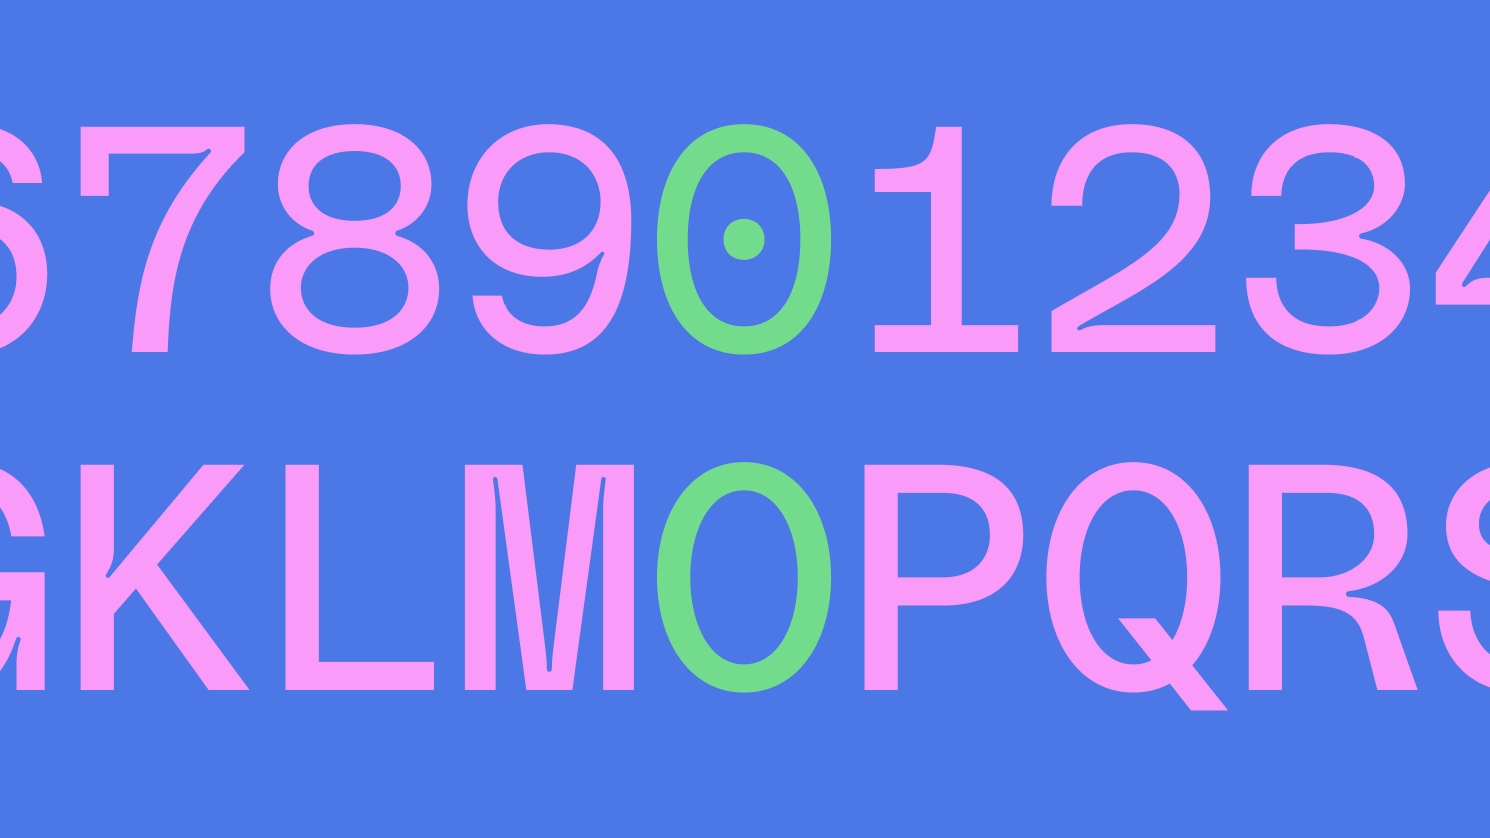 Monospace font used by HTTPie with improved 0 characters